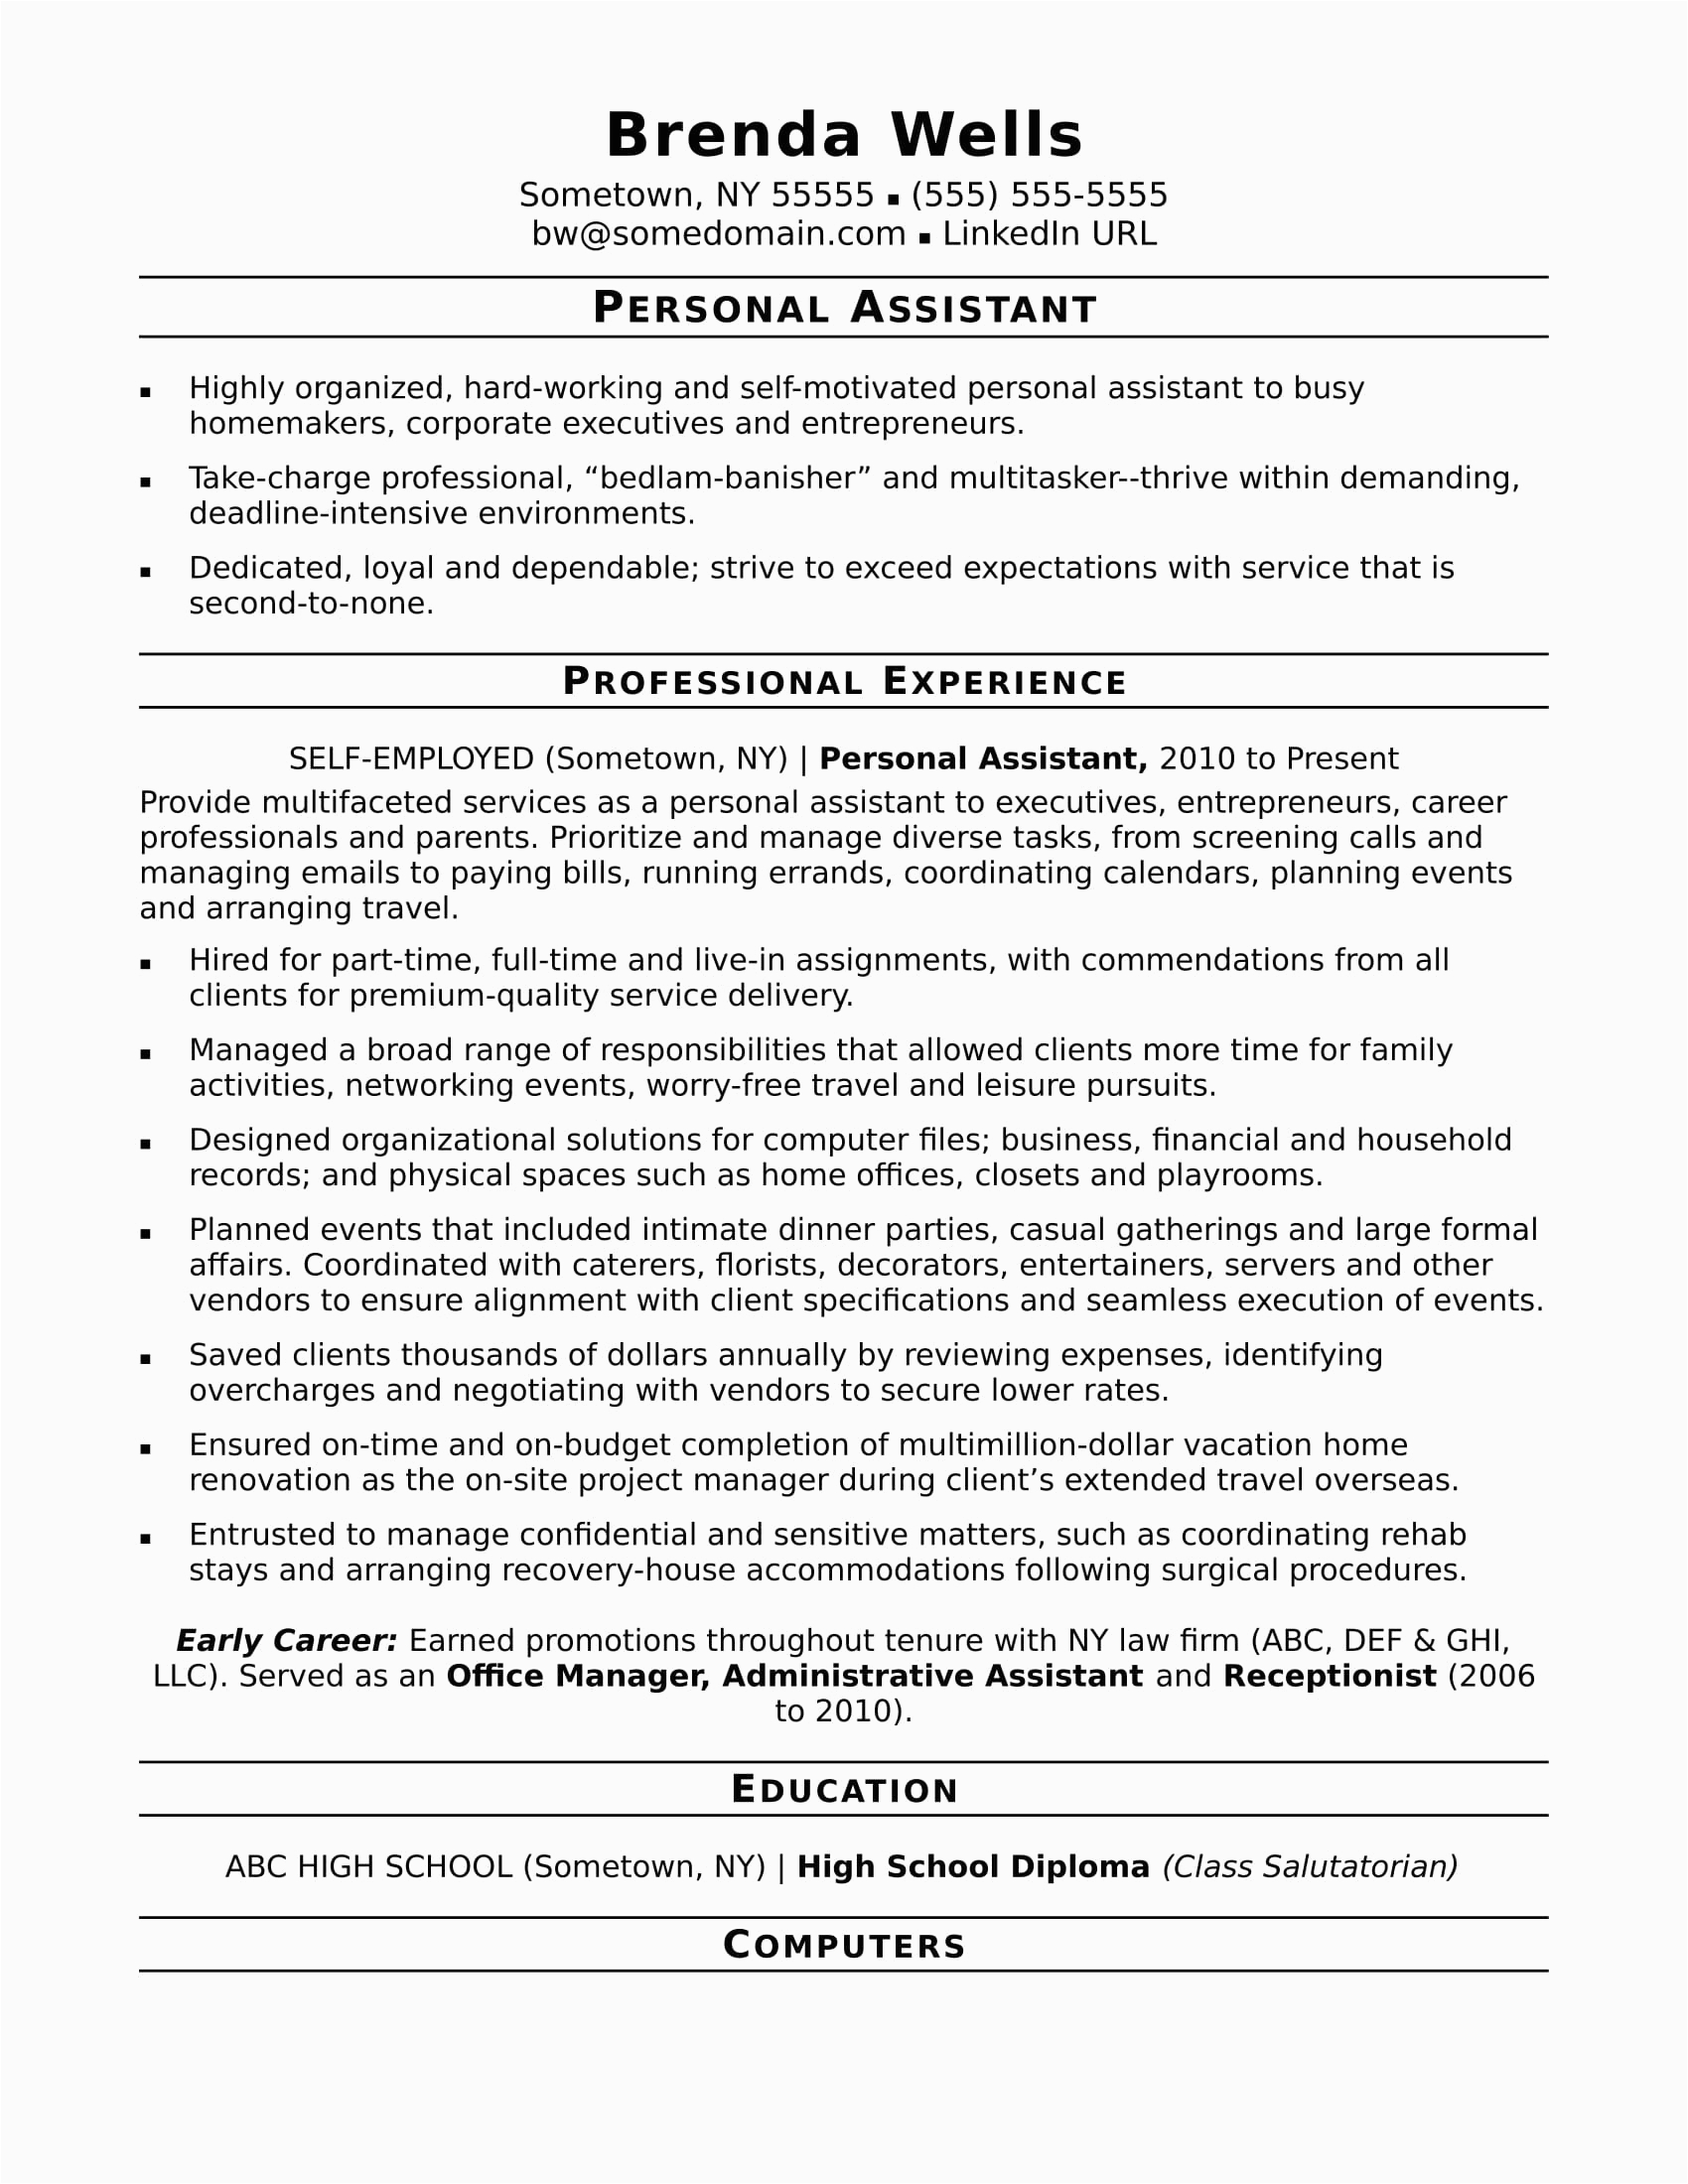 Sample Resume for Virtual assistant with No Experience Virtual assistant Resume No Experience February 2021